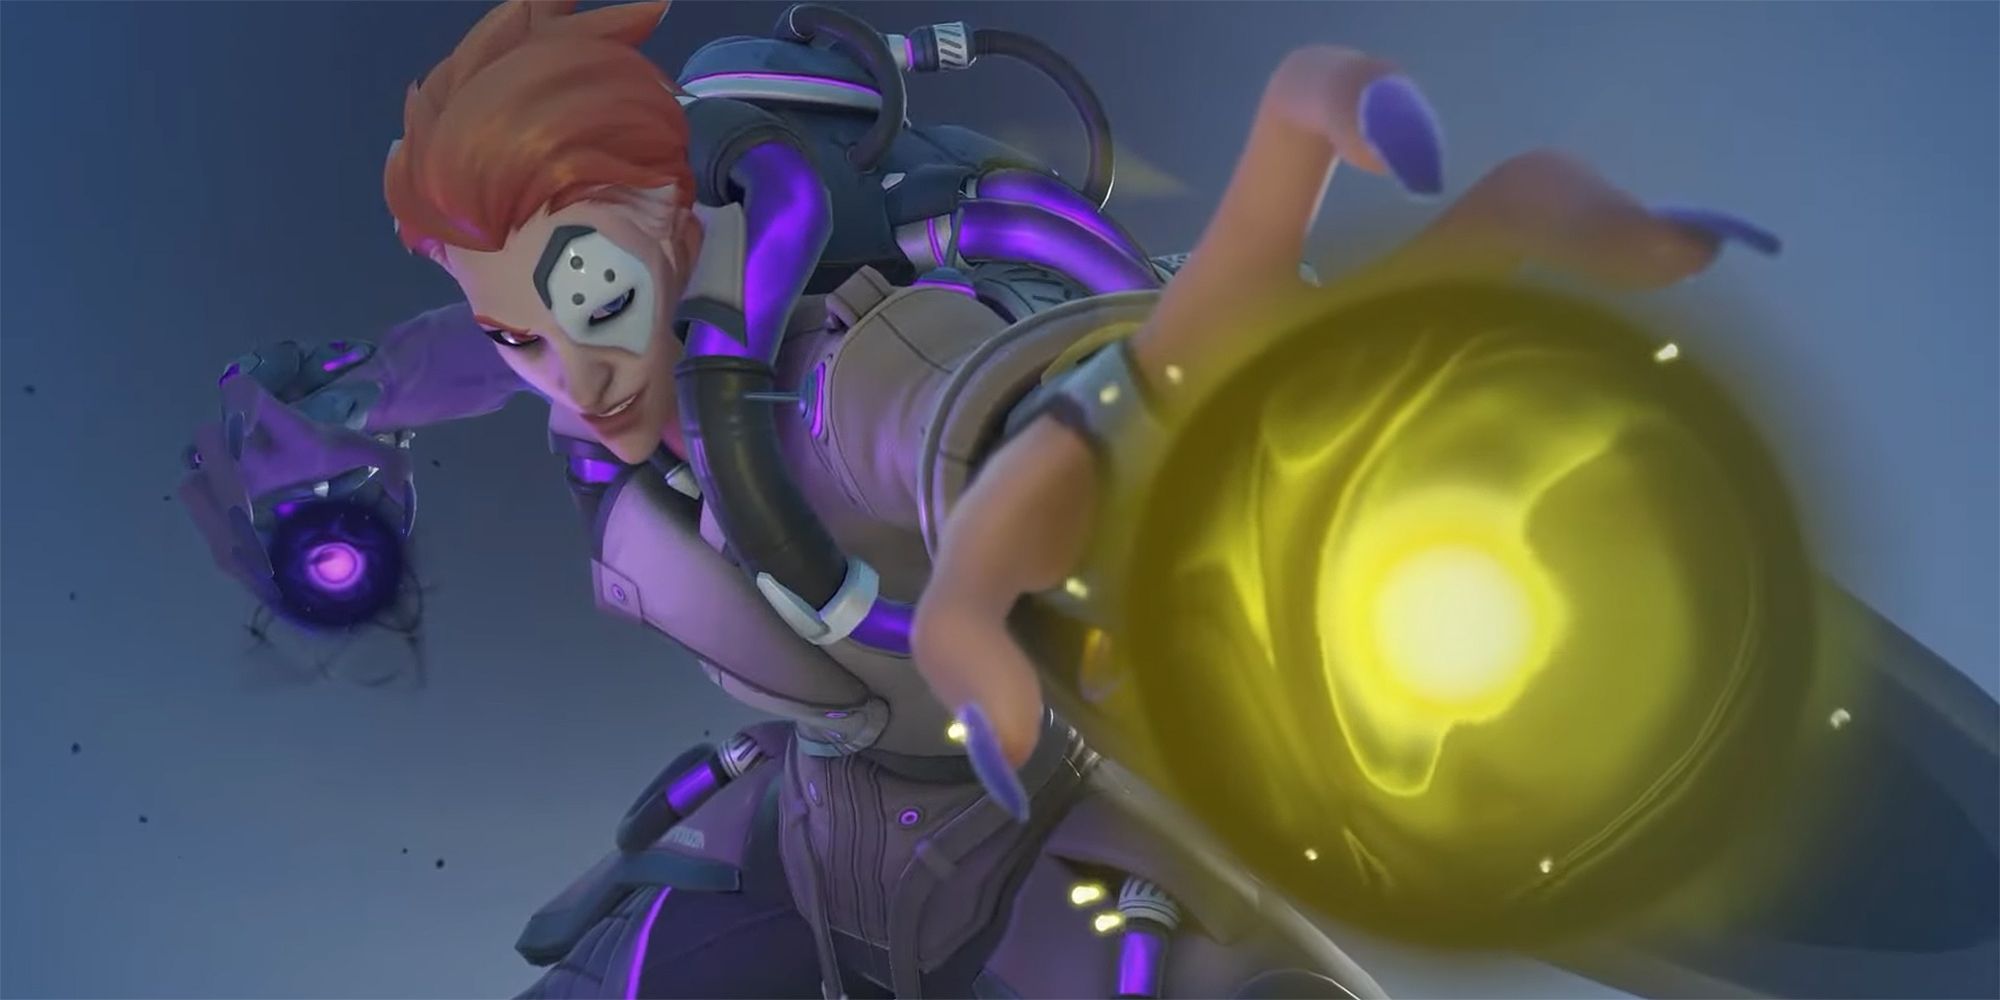 moira activating biotic orbs in her highlight intro